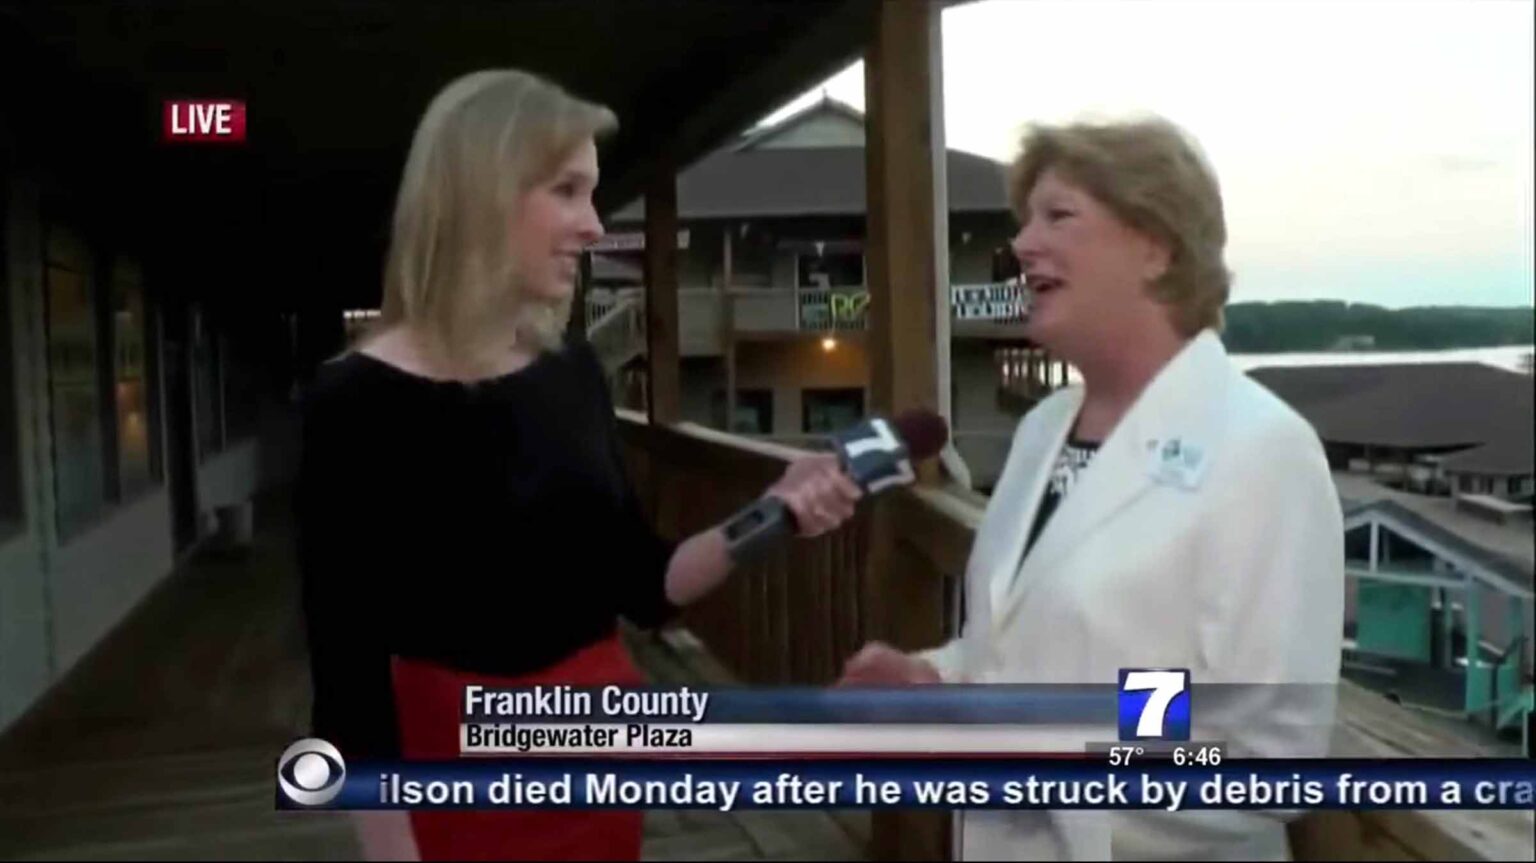 One of the saddest things about this tragedy is the televised nature of it. Here's what happened to Alison Parker and Vicki Gardner.